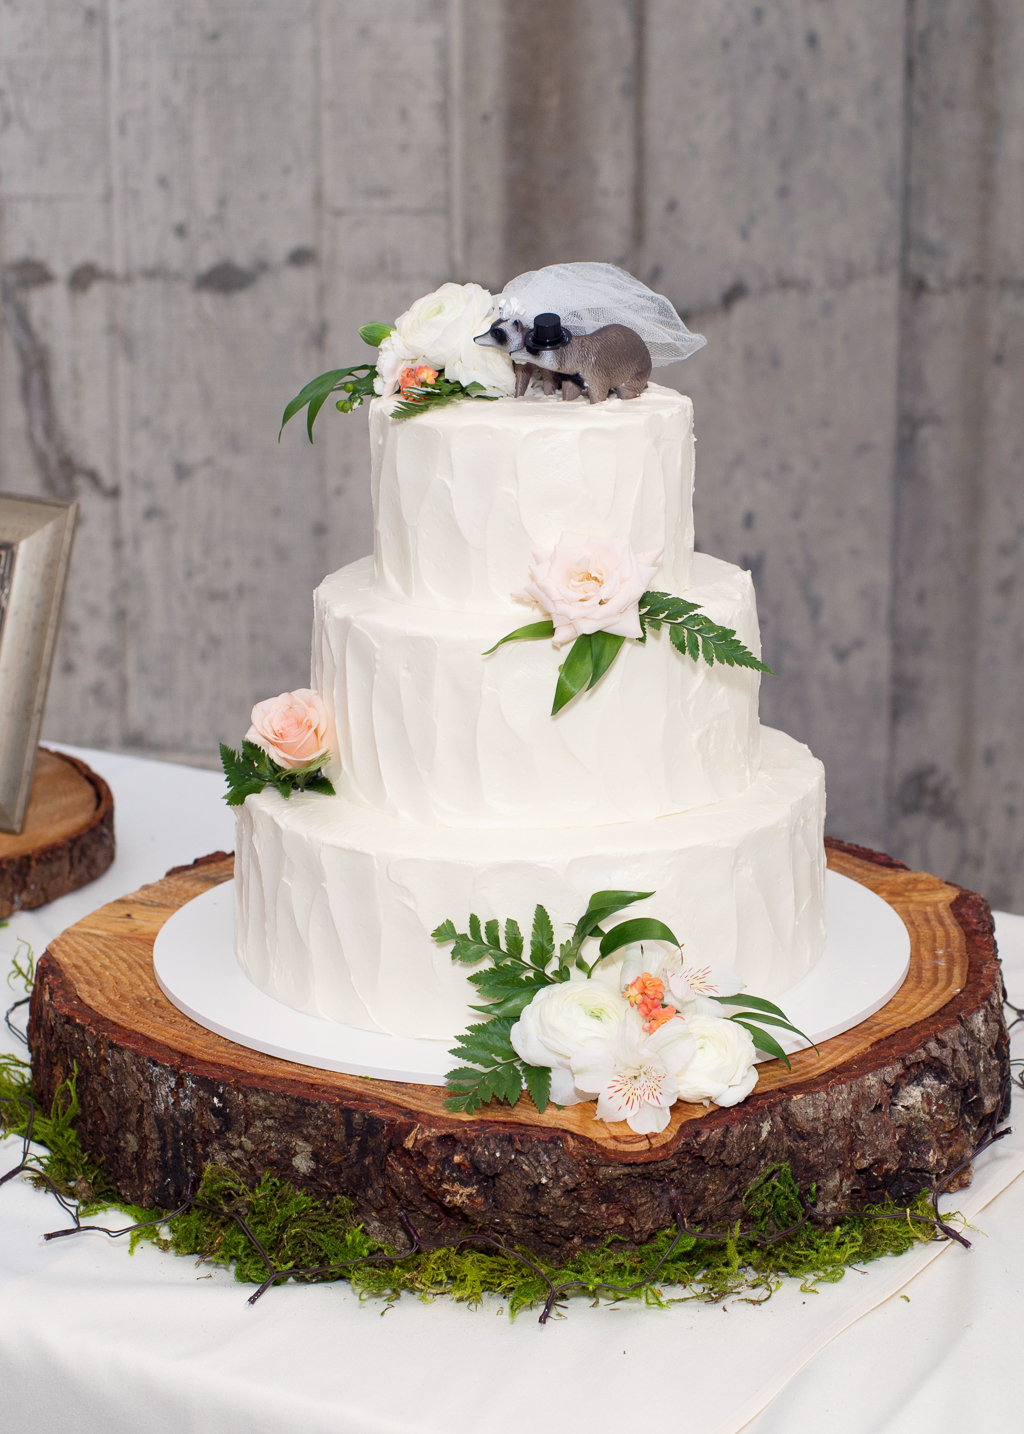 two raccoons dressed like the bride and groom sit on top of a 3 tier white wedding cake